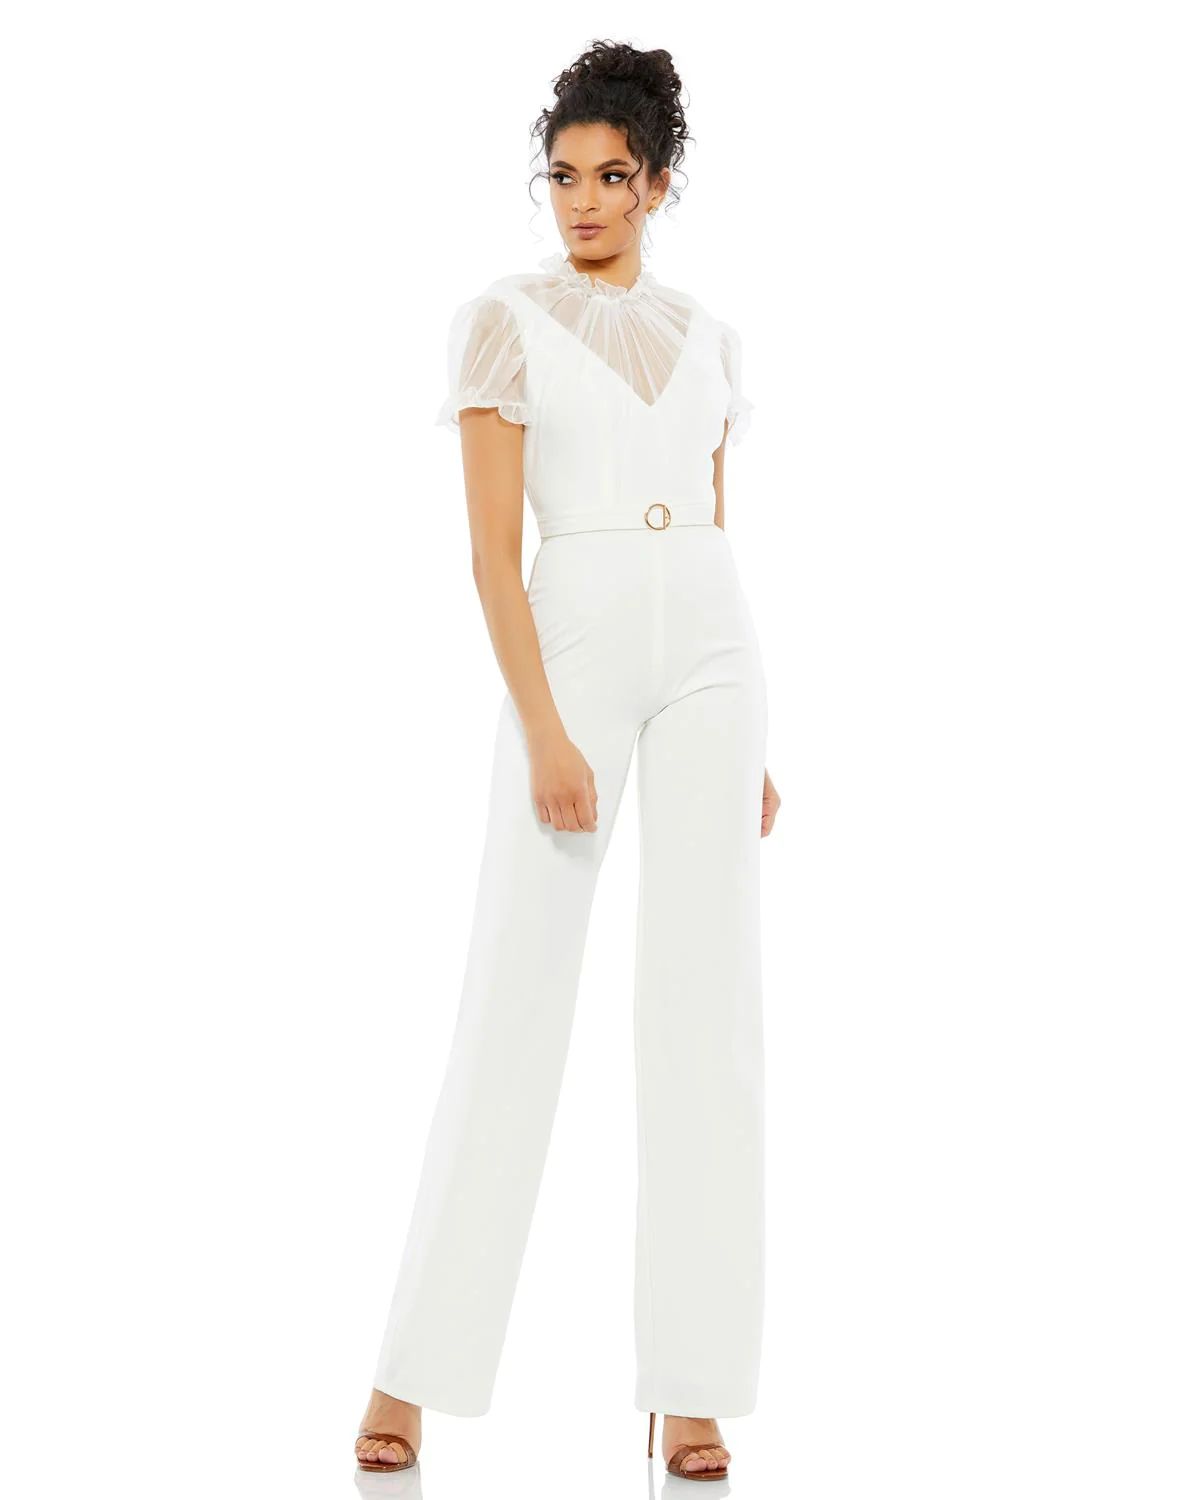 Ieena for Mac Duggal Women's Belted Illusion High Neck Cap Sleeve Jumpsuit Dress in White 2 Lord & T | Lord & Taylor